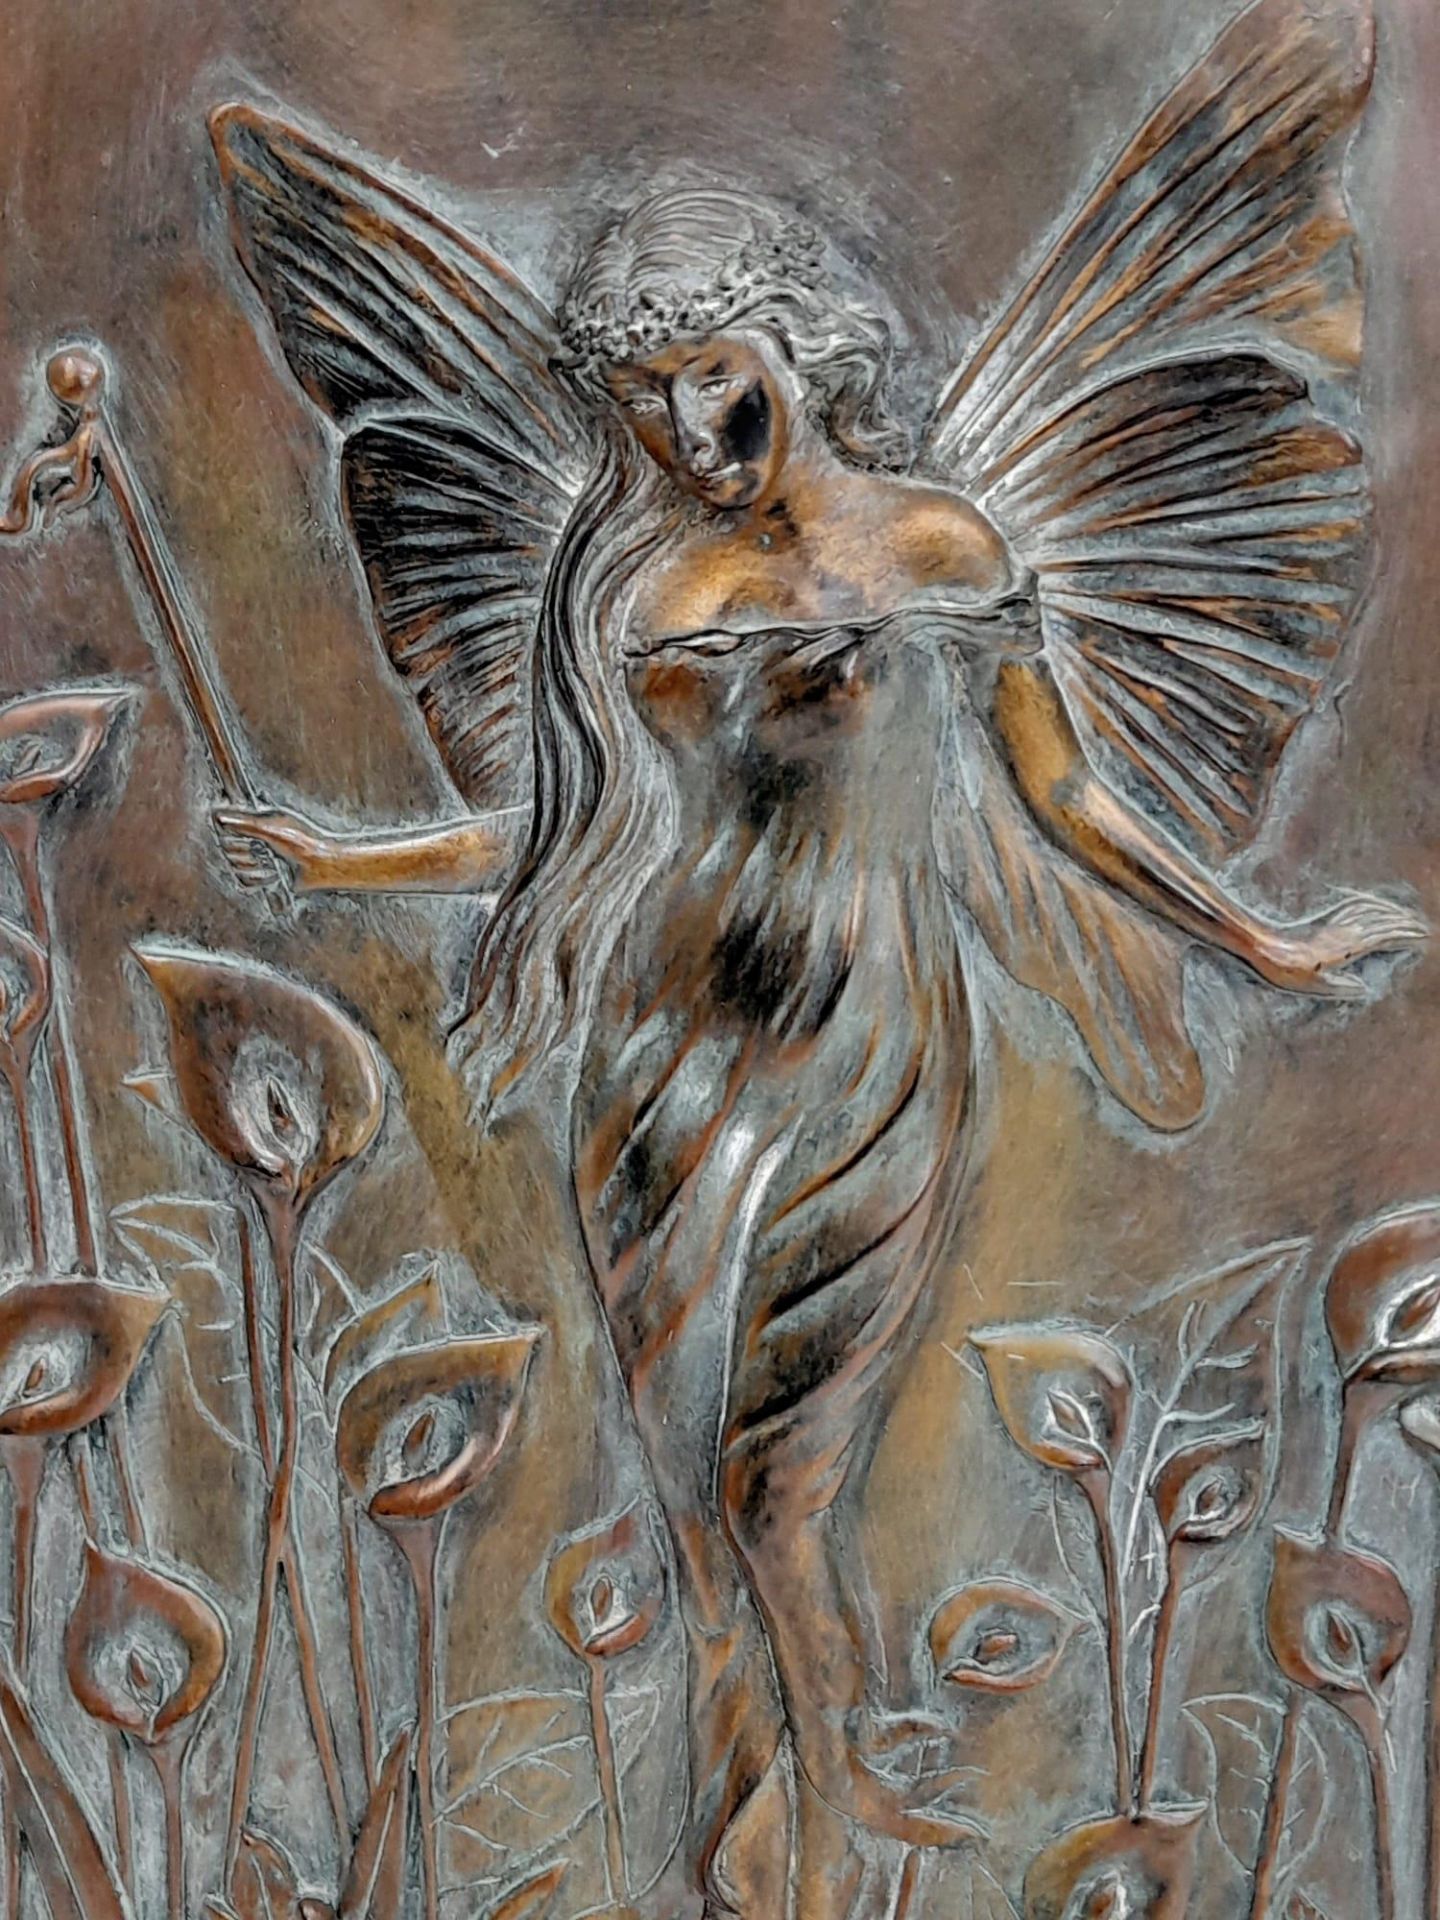 A Vintage Bronzed Art Nouveau Design Wall Plaque Relief of a Water Nymph or Fairy made by Past - Image 2 of 5